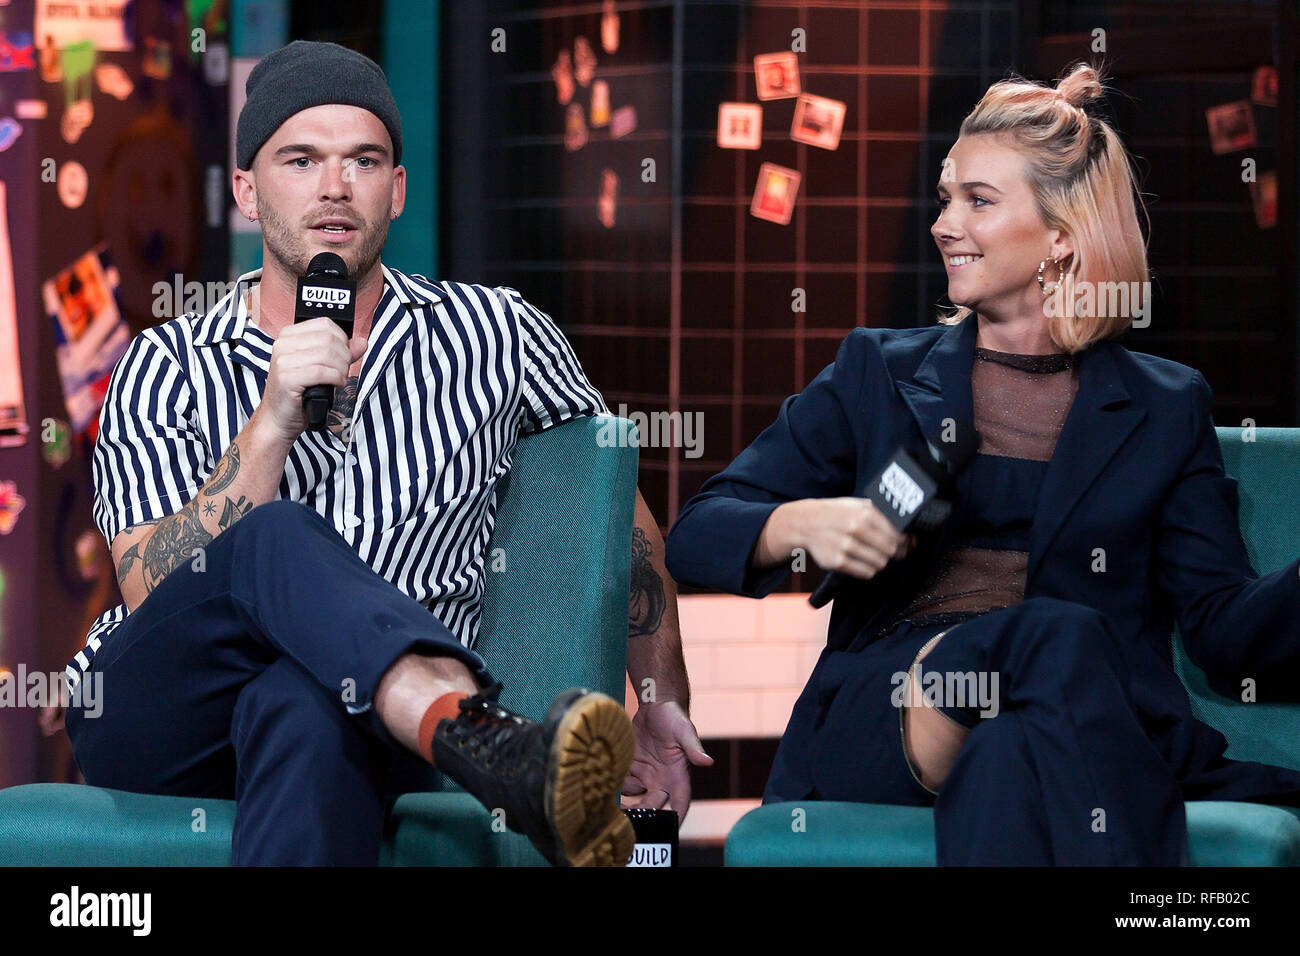 New York, USA. 24 Jan, 2019. Caleb Nott, Georgia Nott at The Thursday, Jan 24, 2019 BUILD Series Inside Candids of the band Broods discussing the new album 'Concious' at BUILD Studio in New York, USA. Credit: Steve Mack/S.D. Mack Pictures/Alamy Live News Stock Photo